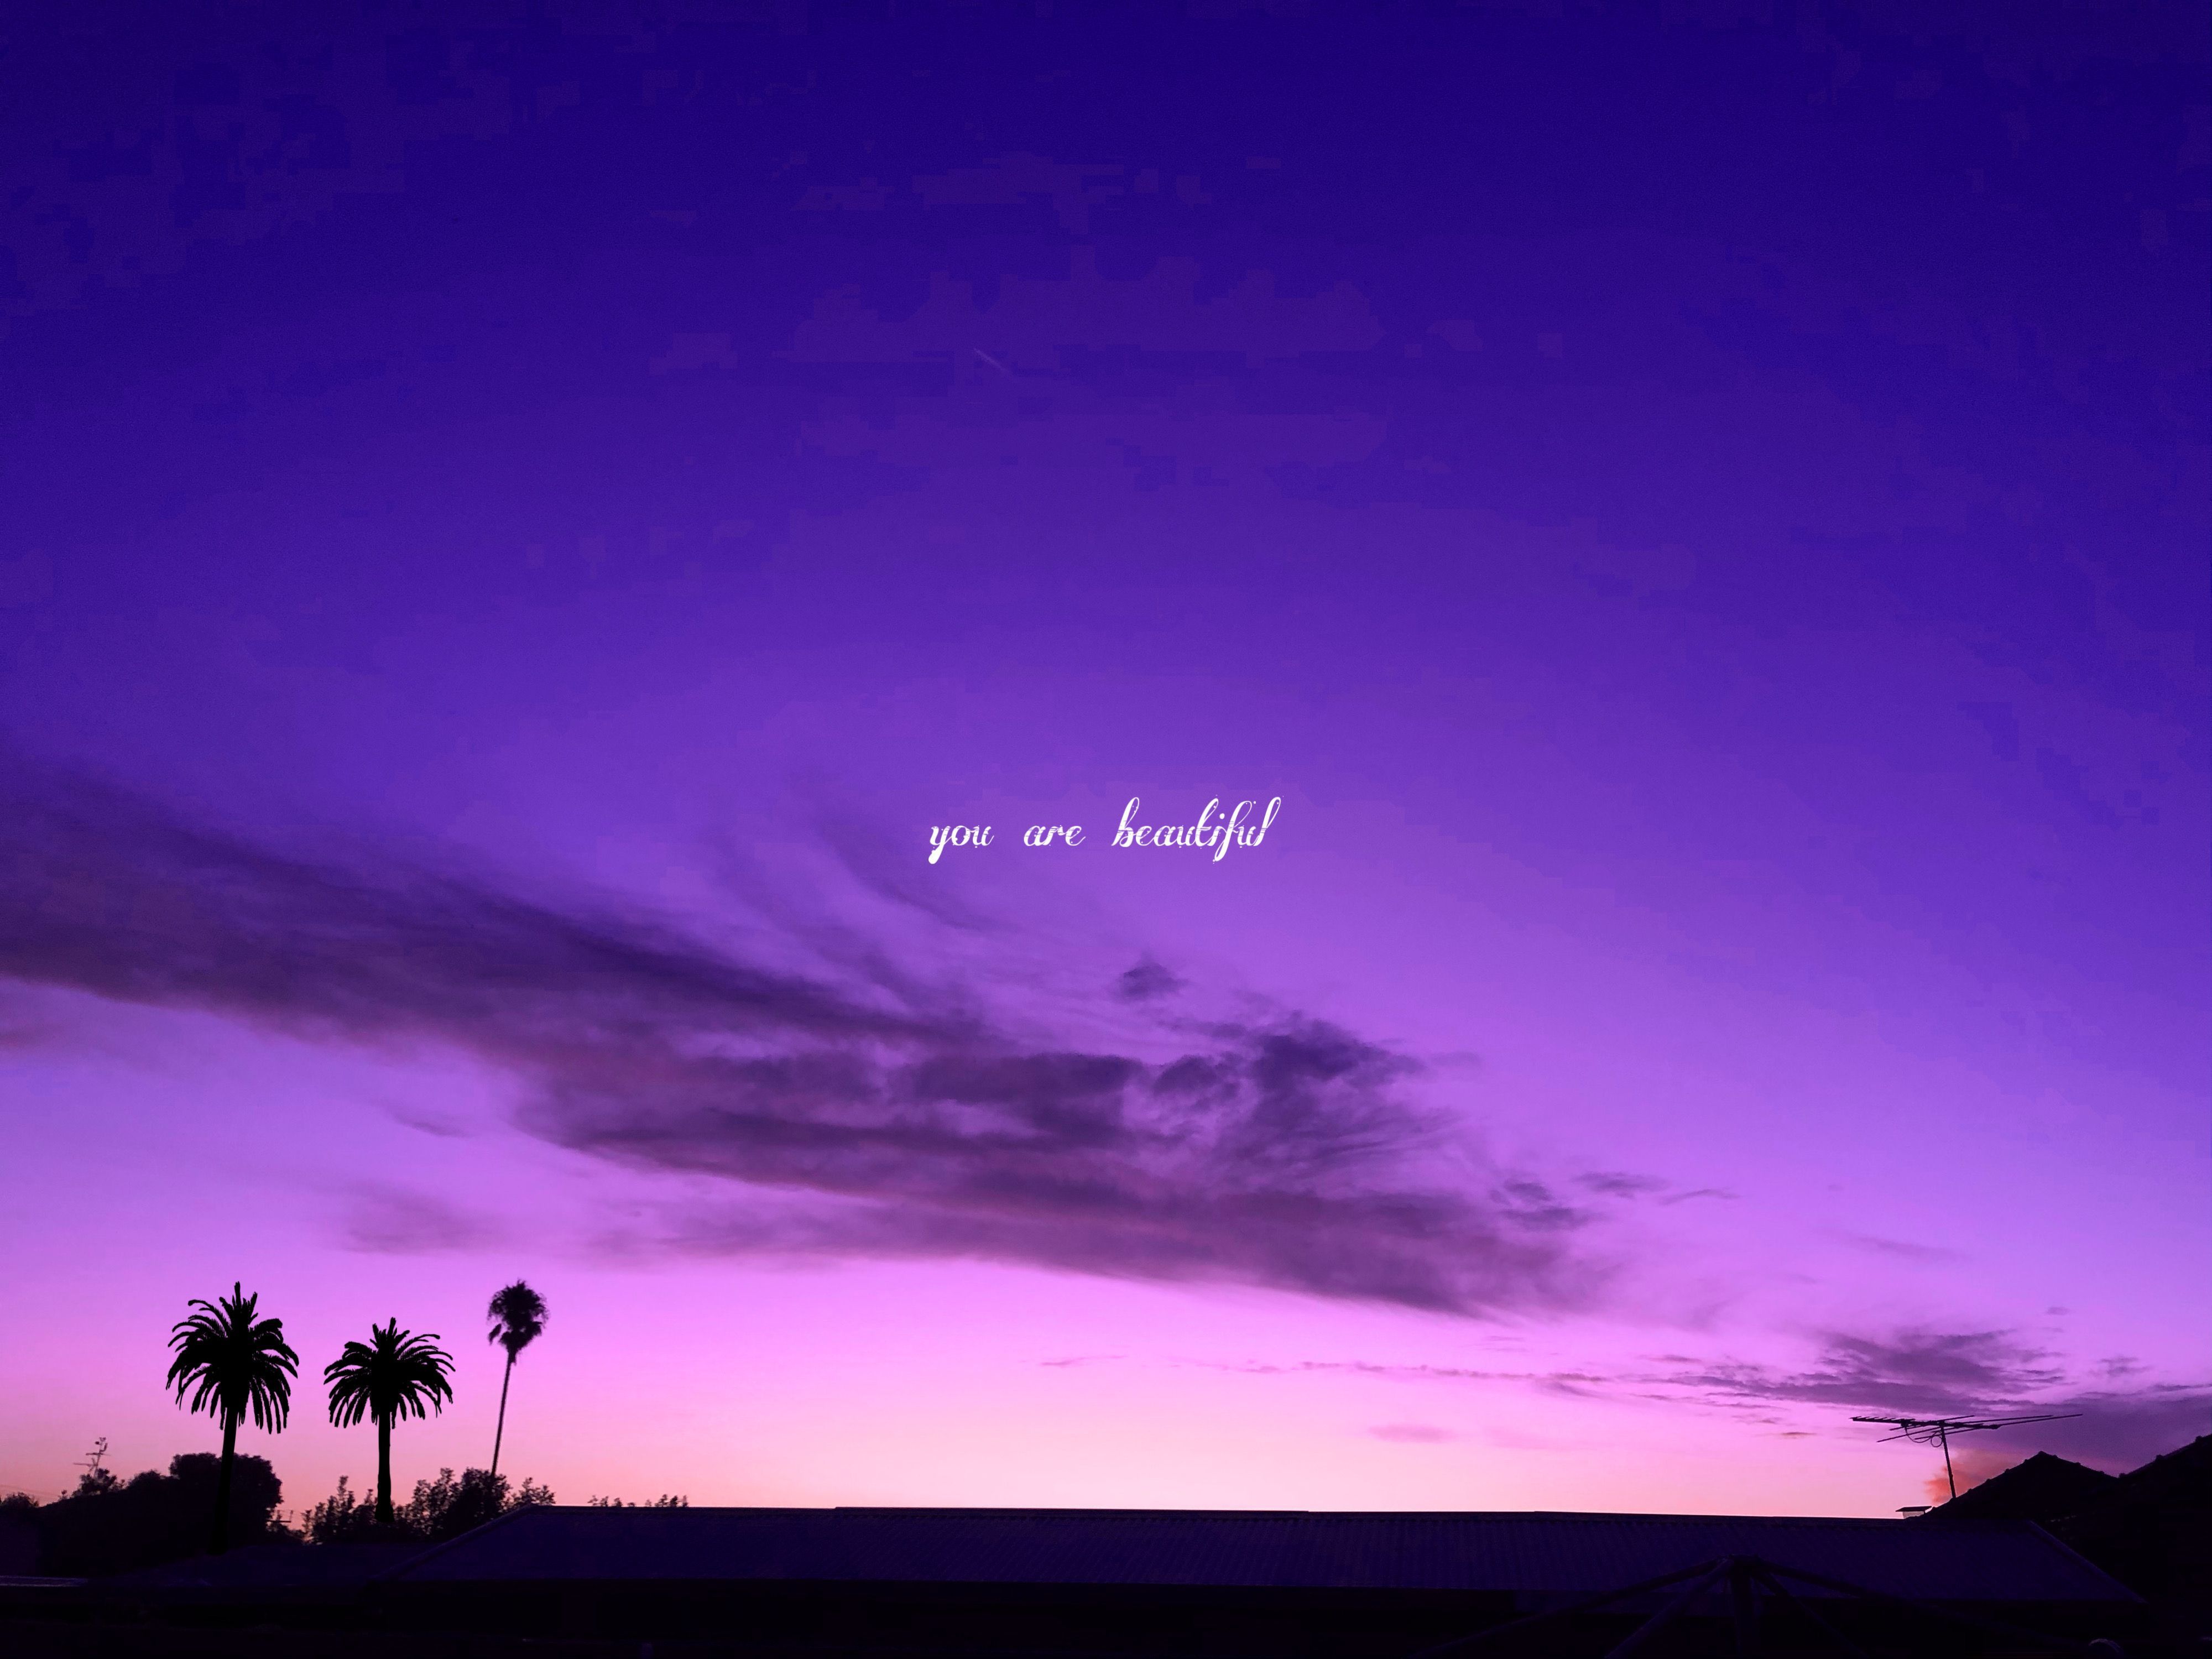 A purple and blue sunset with the words 